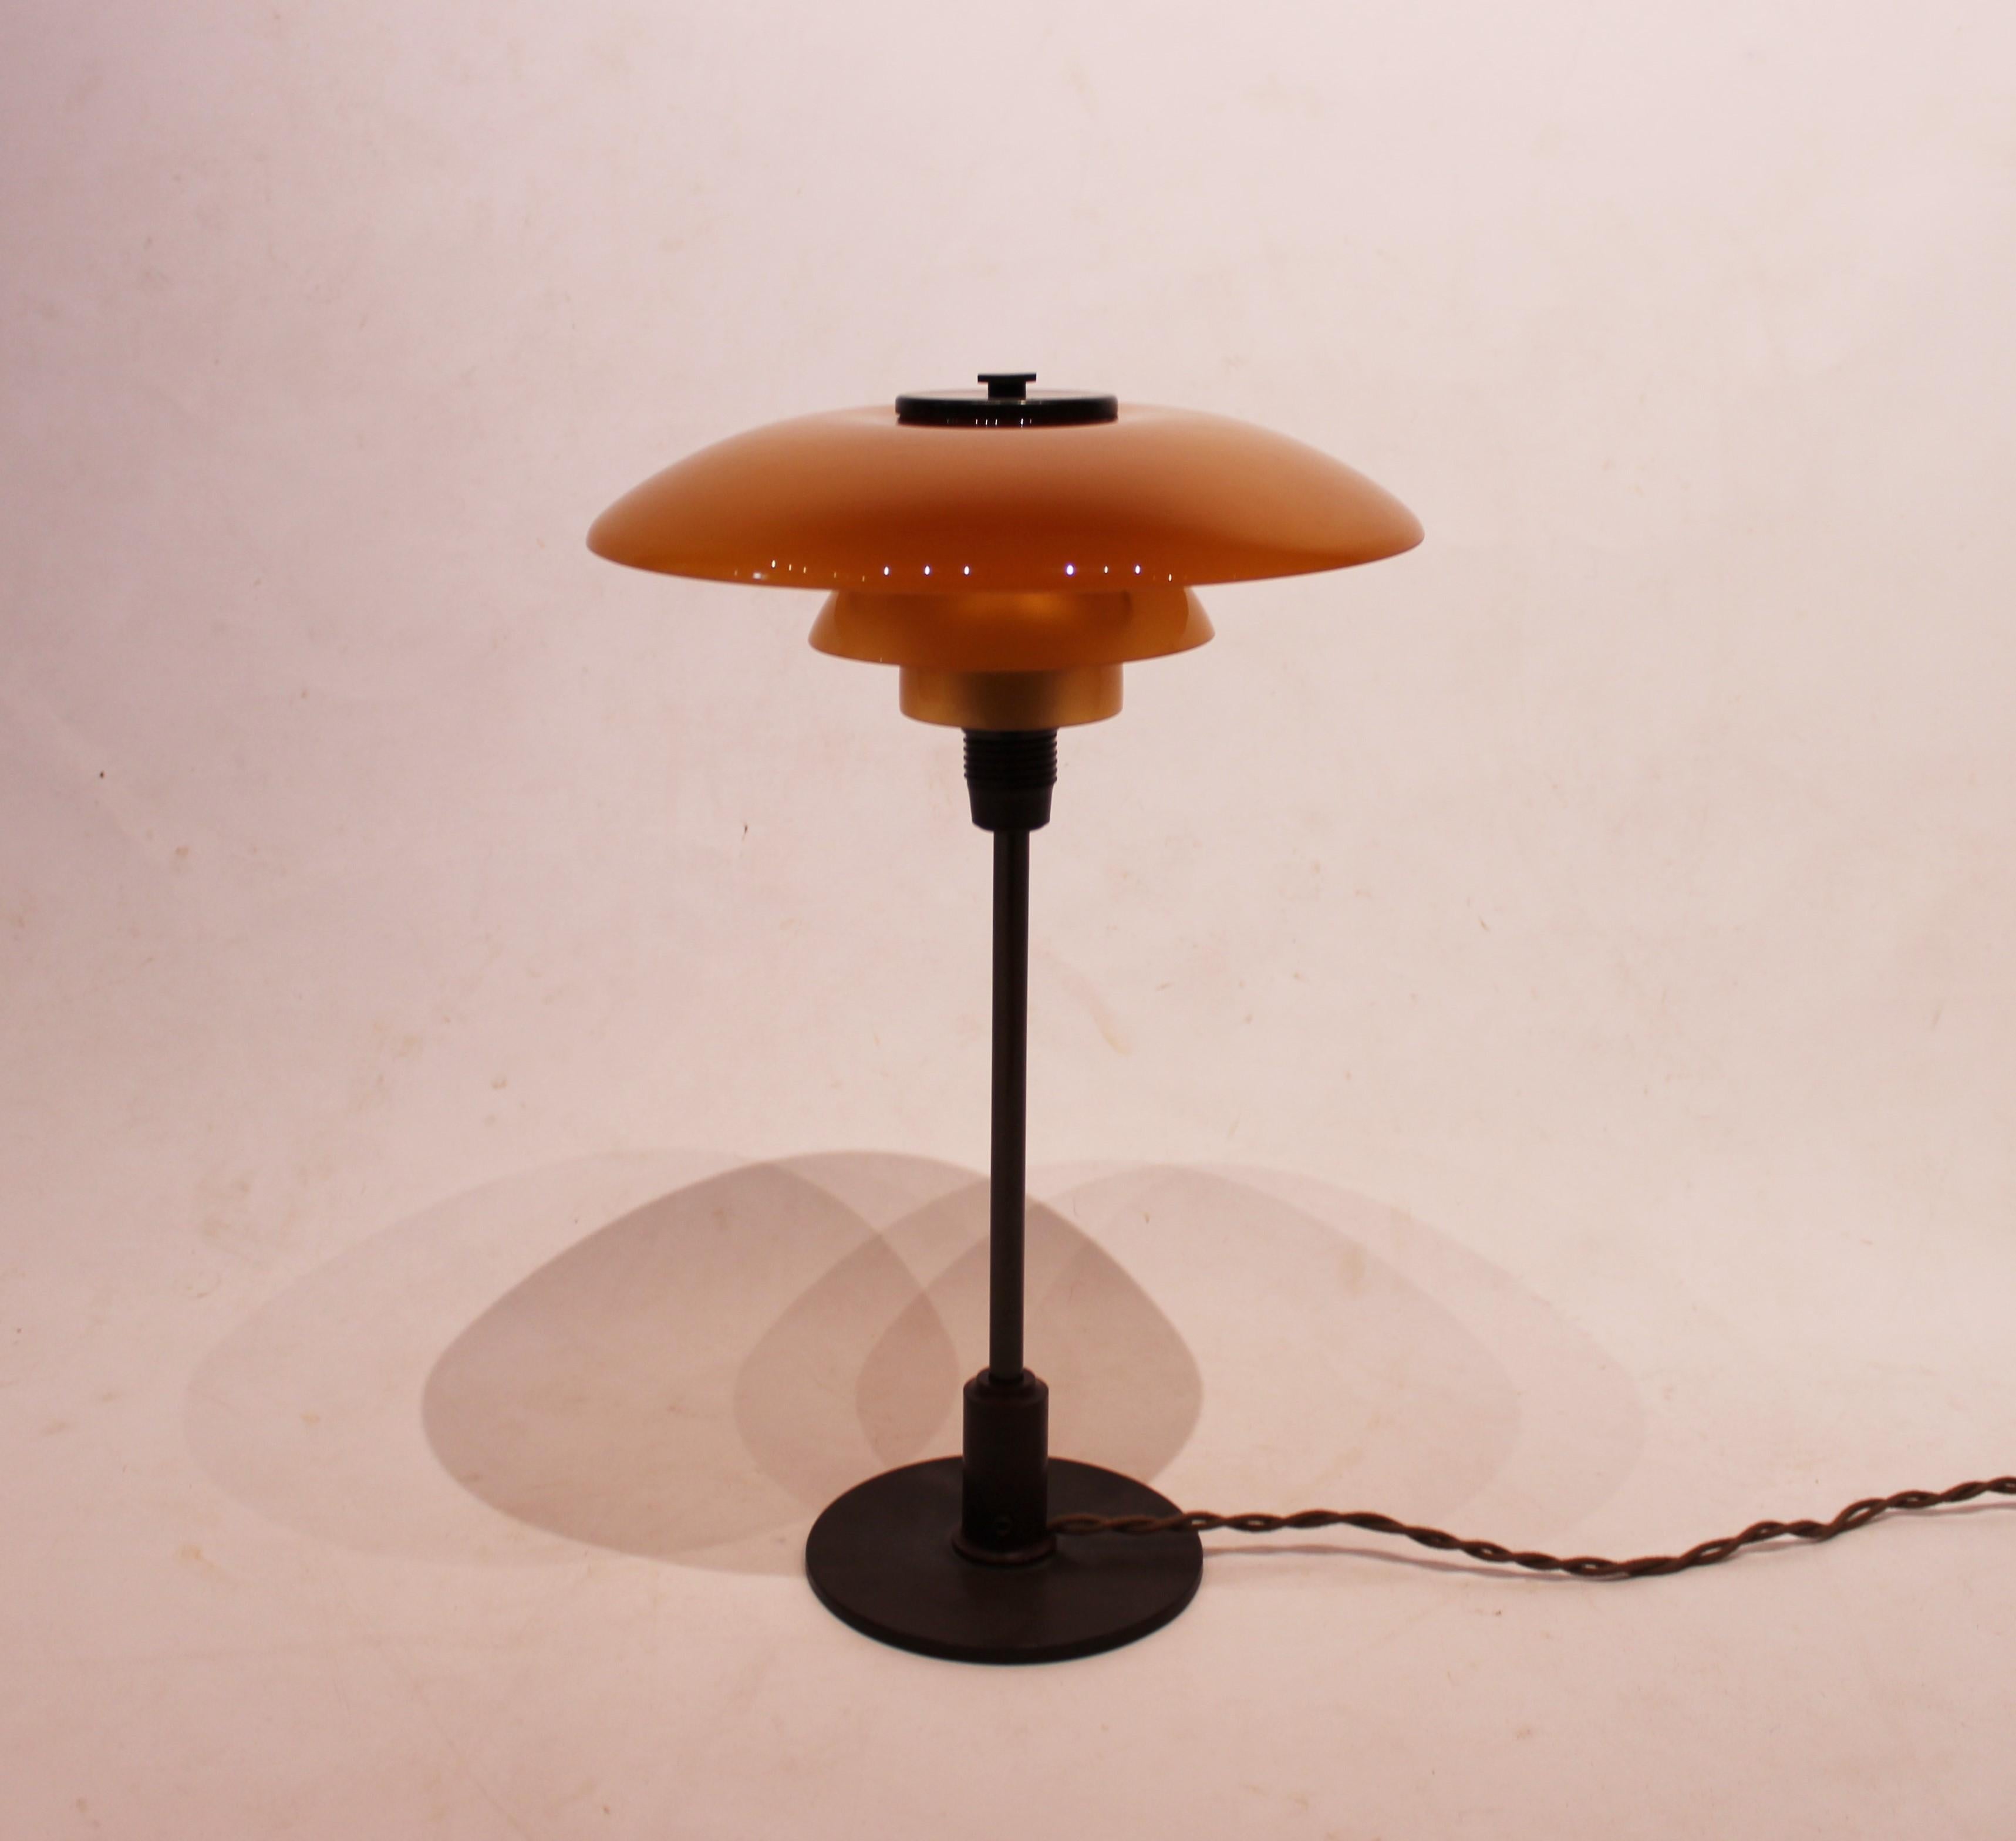 PH 3/2 table lamp with amber colored shades, frame of burnished brass and bakelite socket designed by Poul Henningsen and manufactured by Louis Poulsen in the 1930s. The lamp is in great vintage condition.